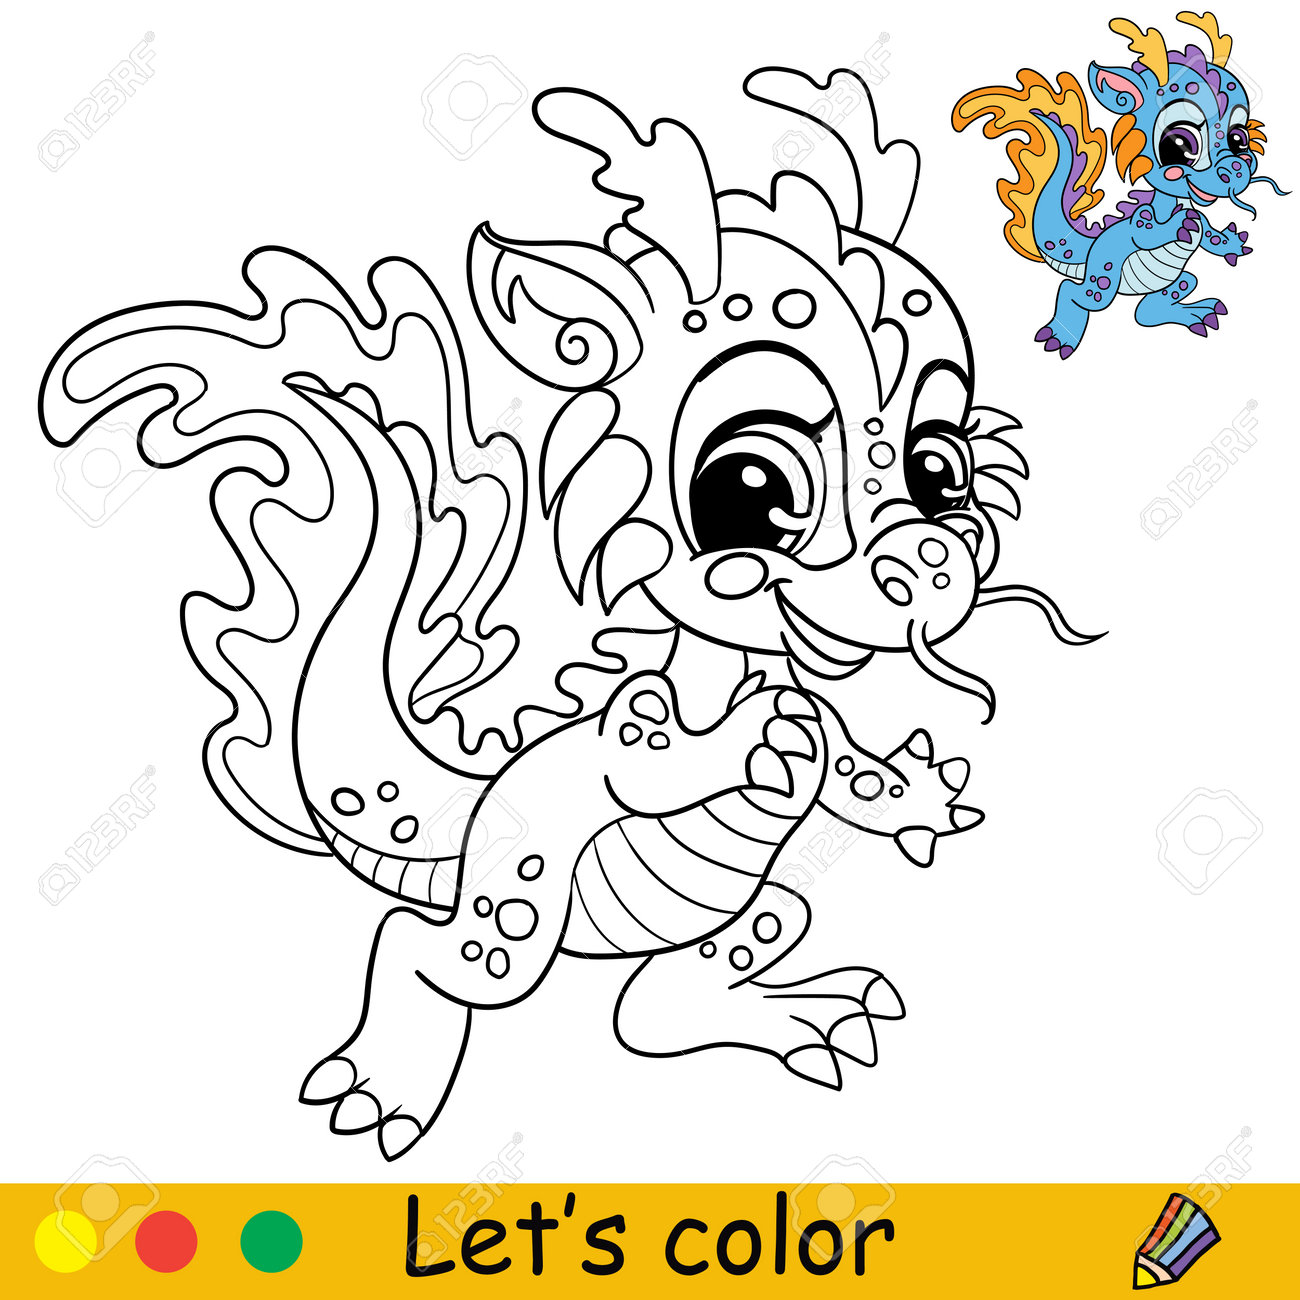 Cute funny water dragon coloring book page with colorful template for kids vector cartoon illustration freehand sketch drawing for coloring print game education party design decor royalty free svg cliparts vectors and